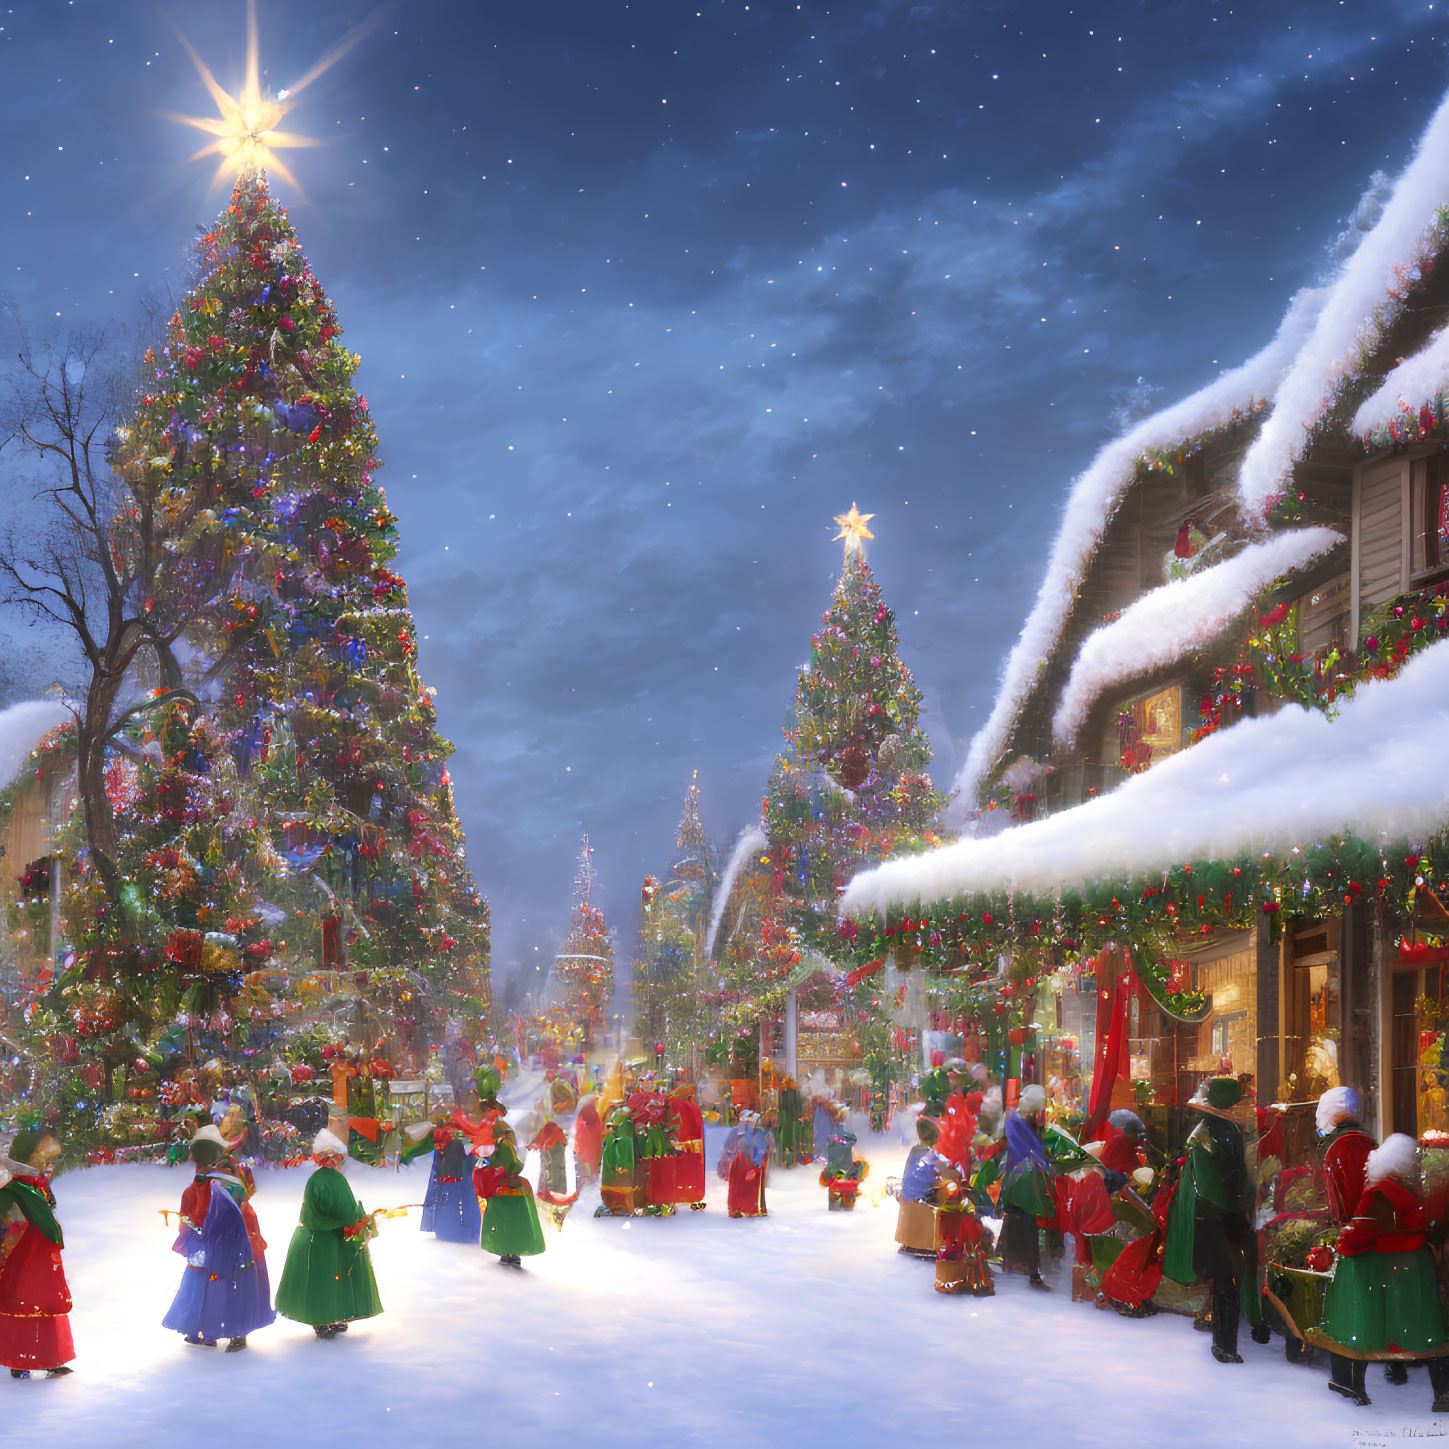 Snowy Christmas Village with Decorated Trees and Festive Attire